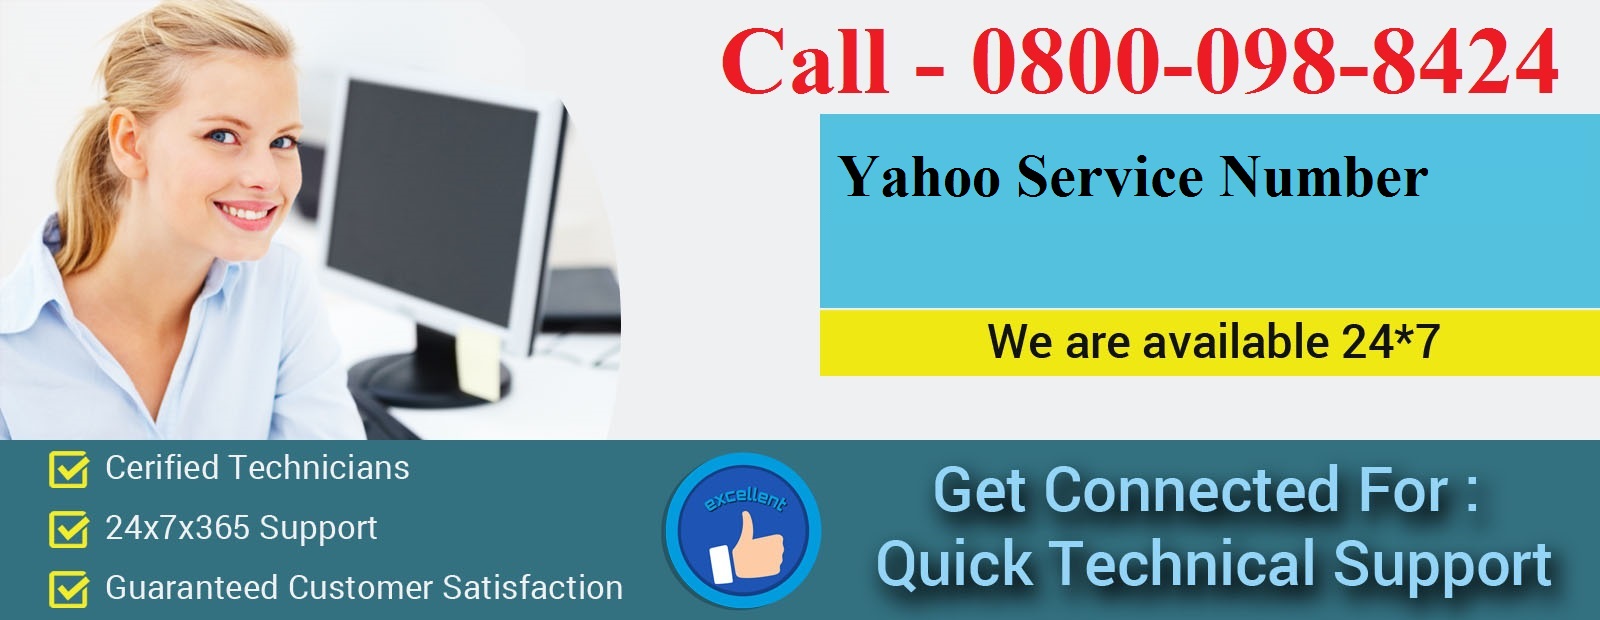 yahoo contact number cover image